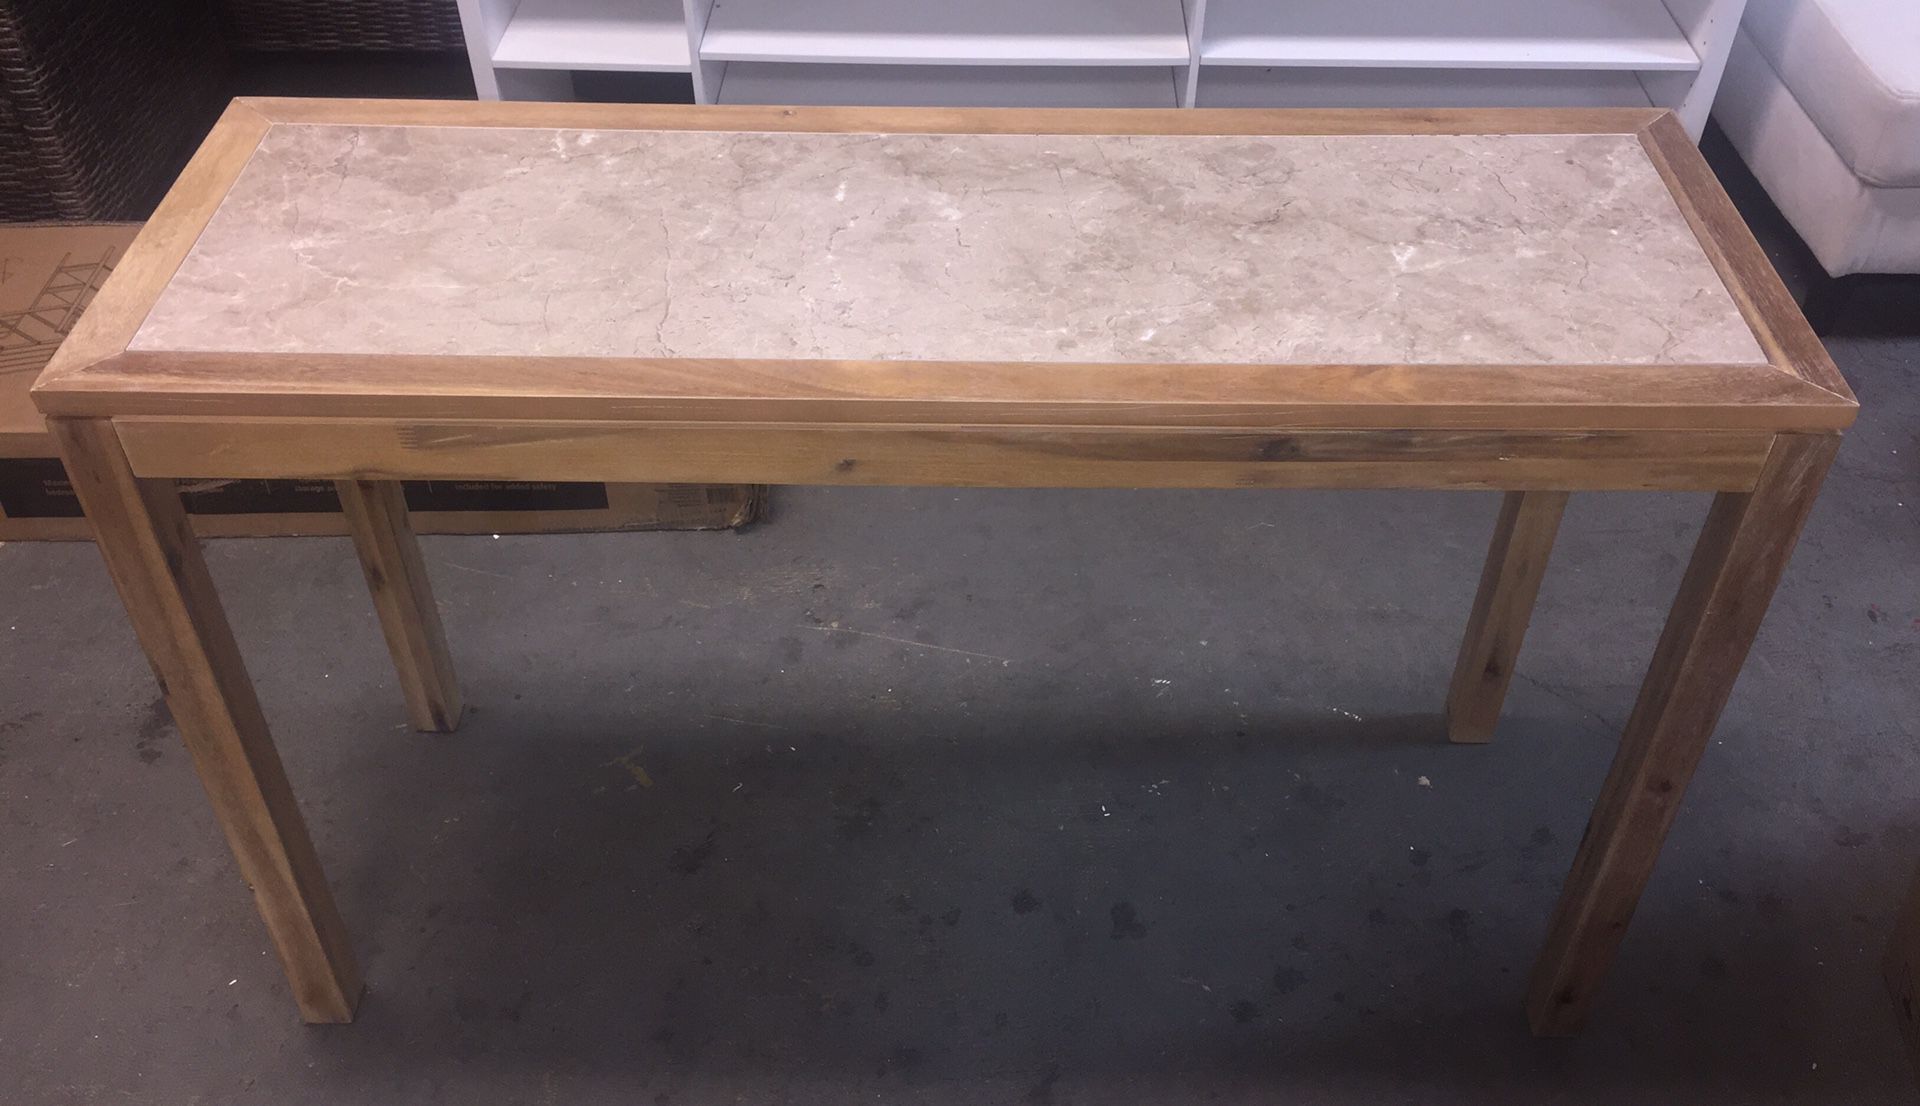 New Console Table with Grey Wash Wood Finish